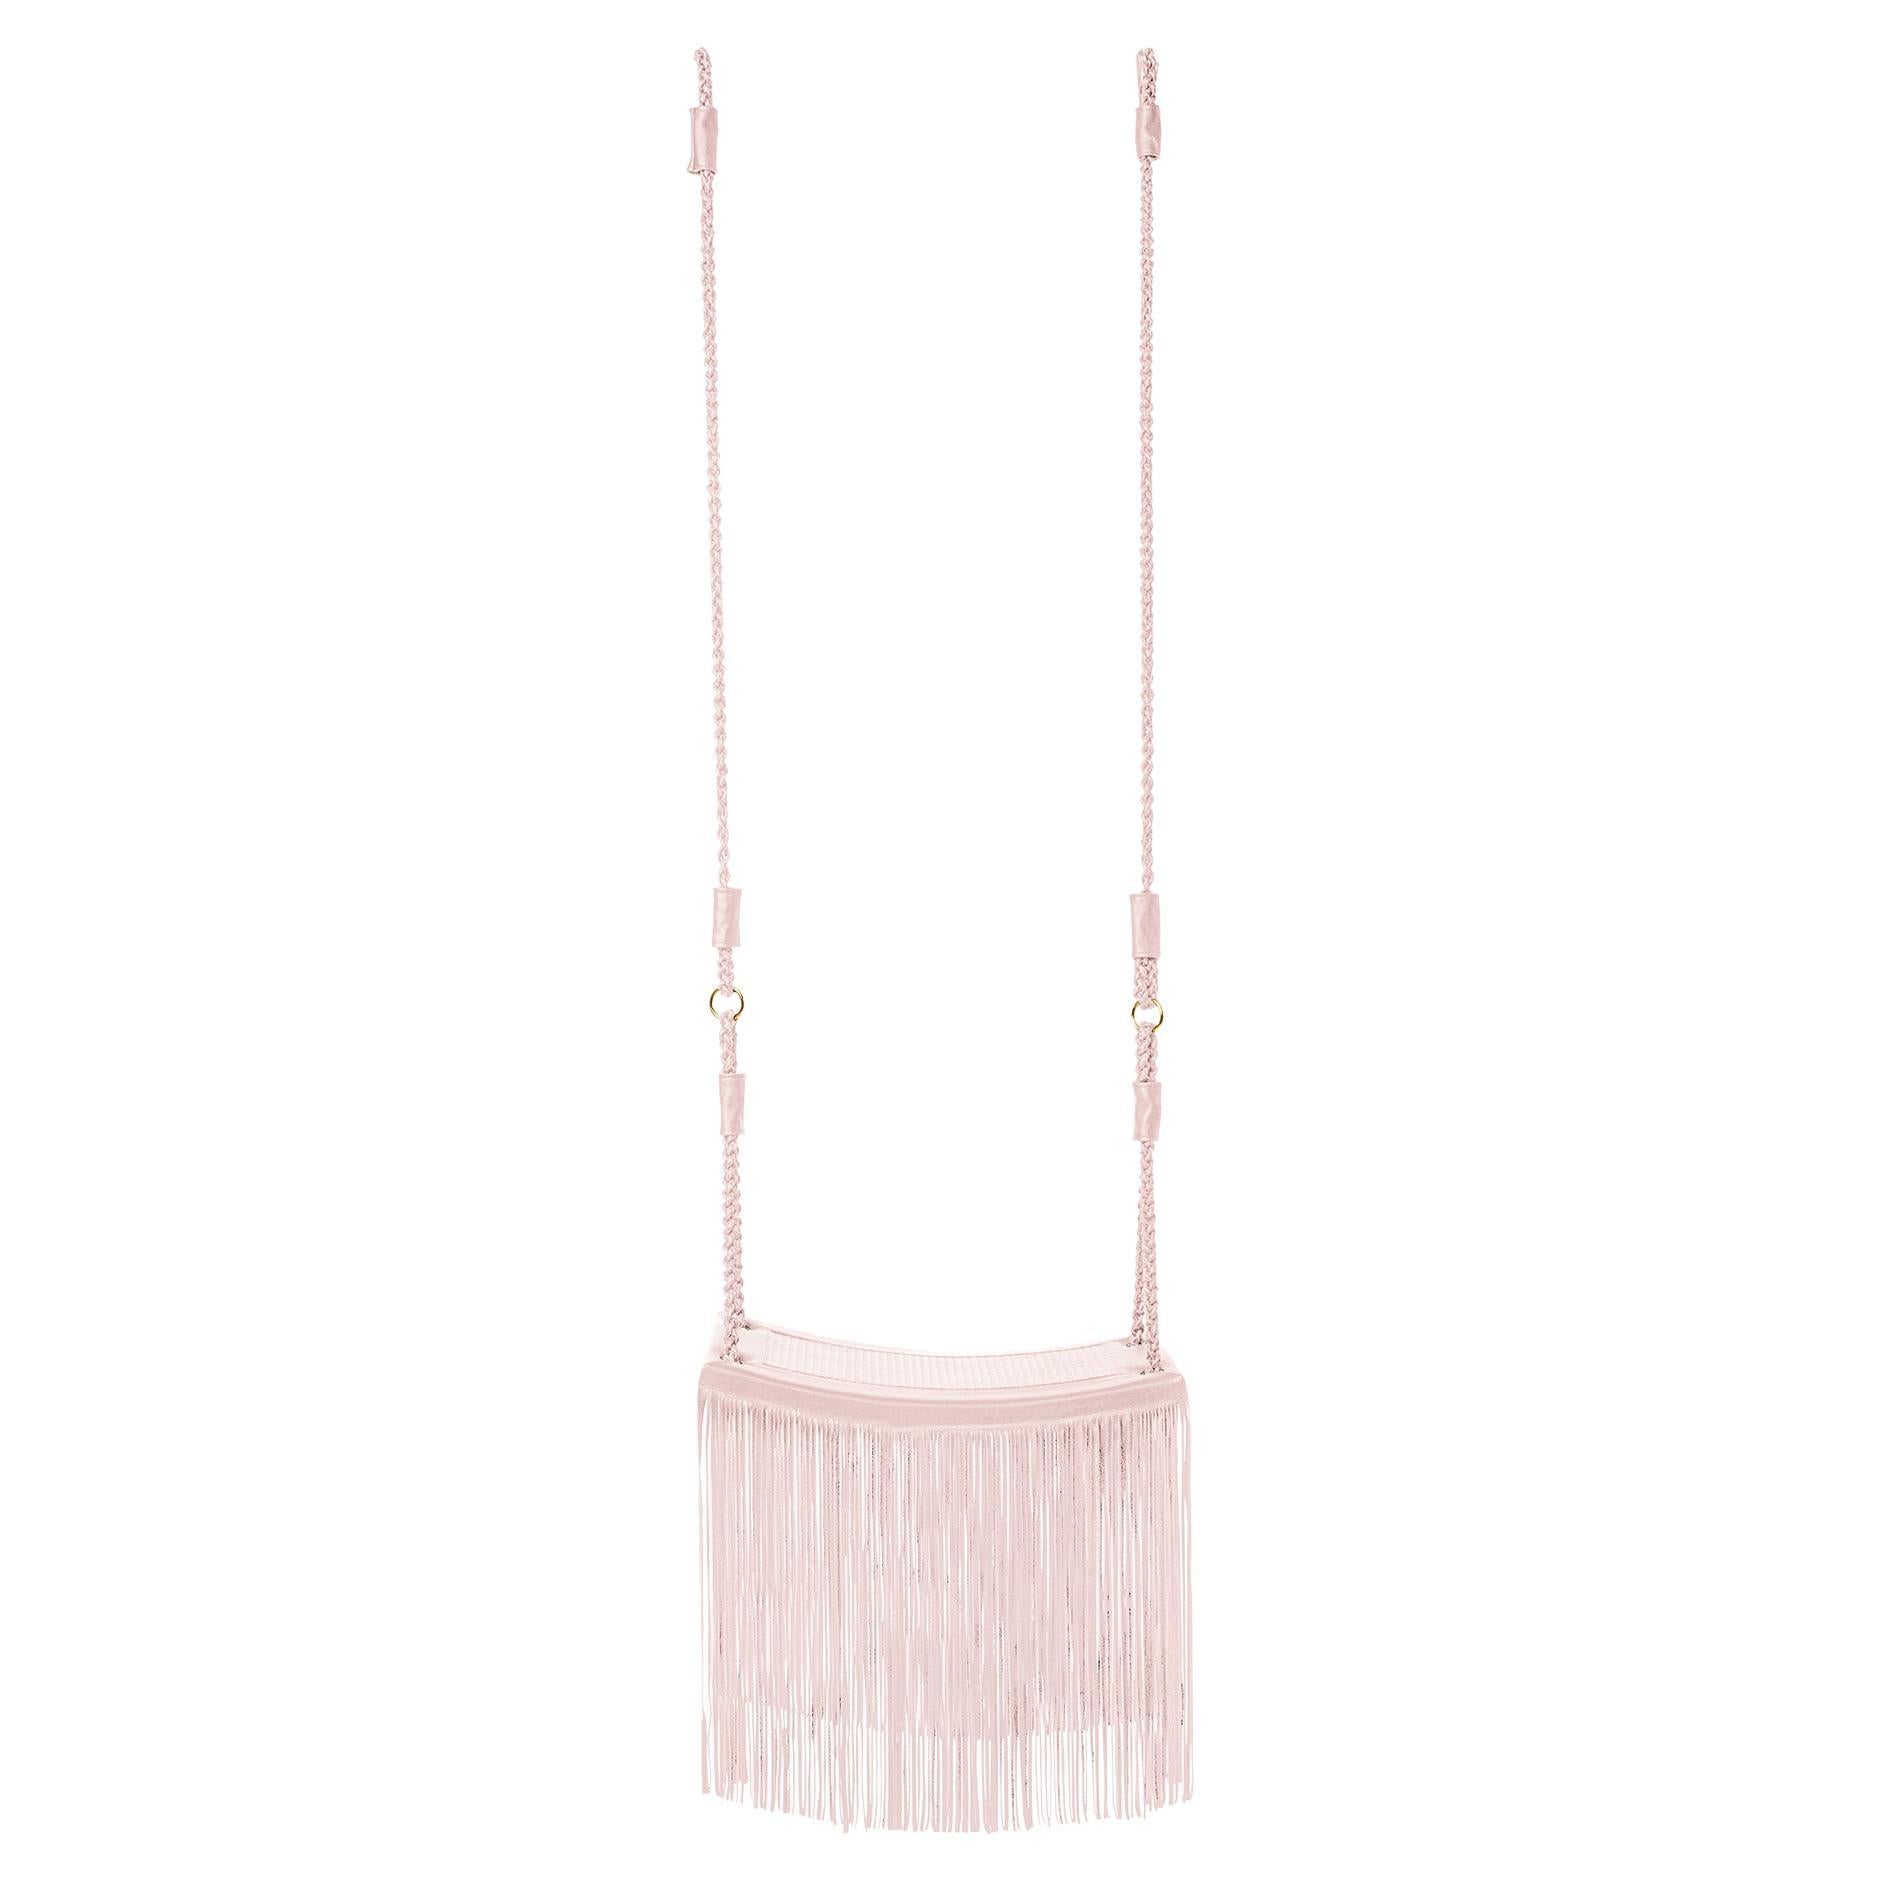 Revoar Hanging Swing Chair Natural Leather Indoor 21st Century Light Pink Color